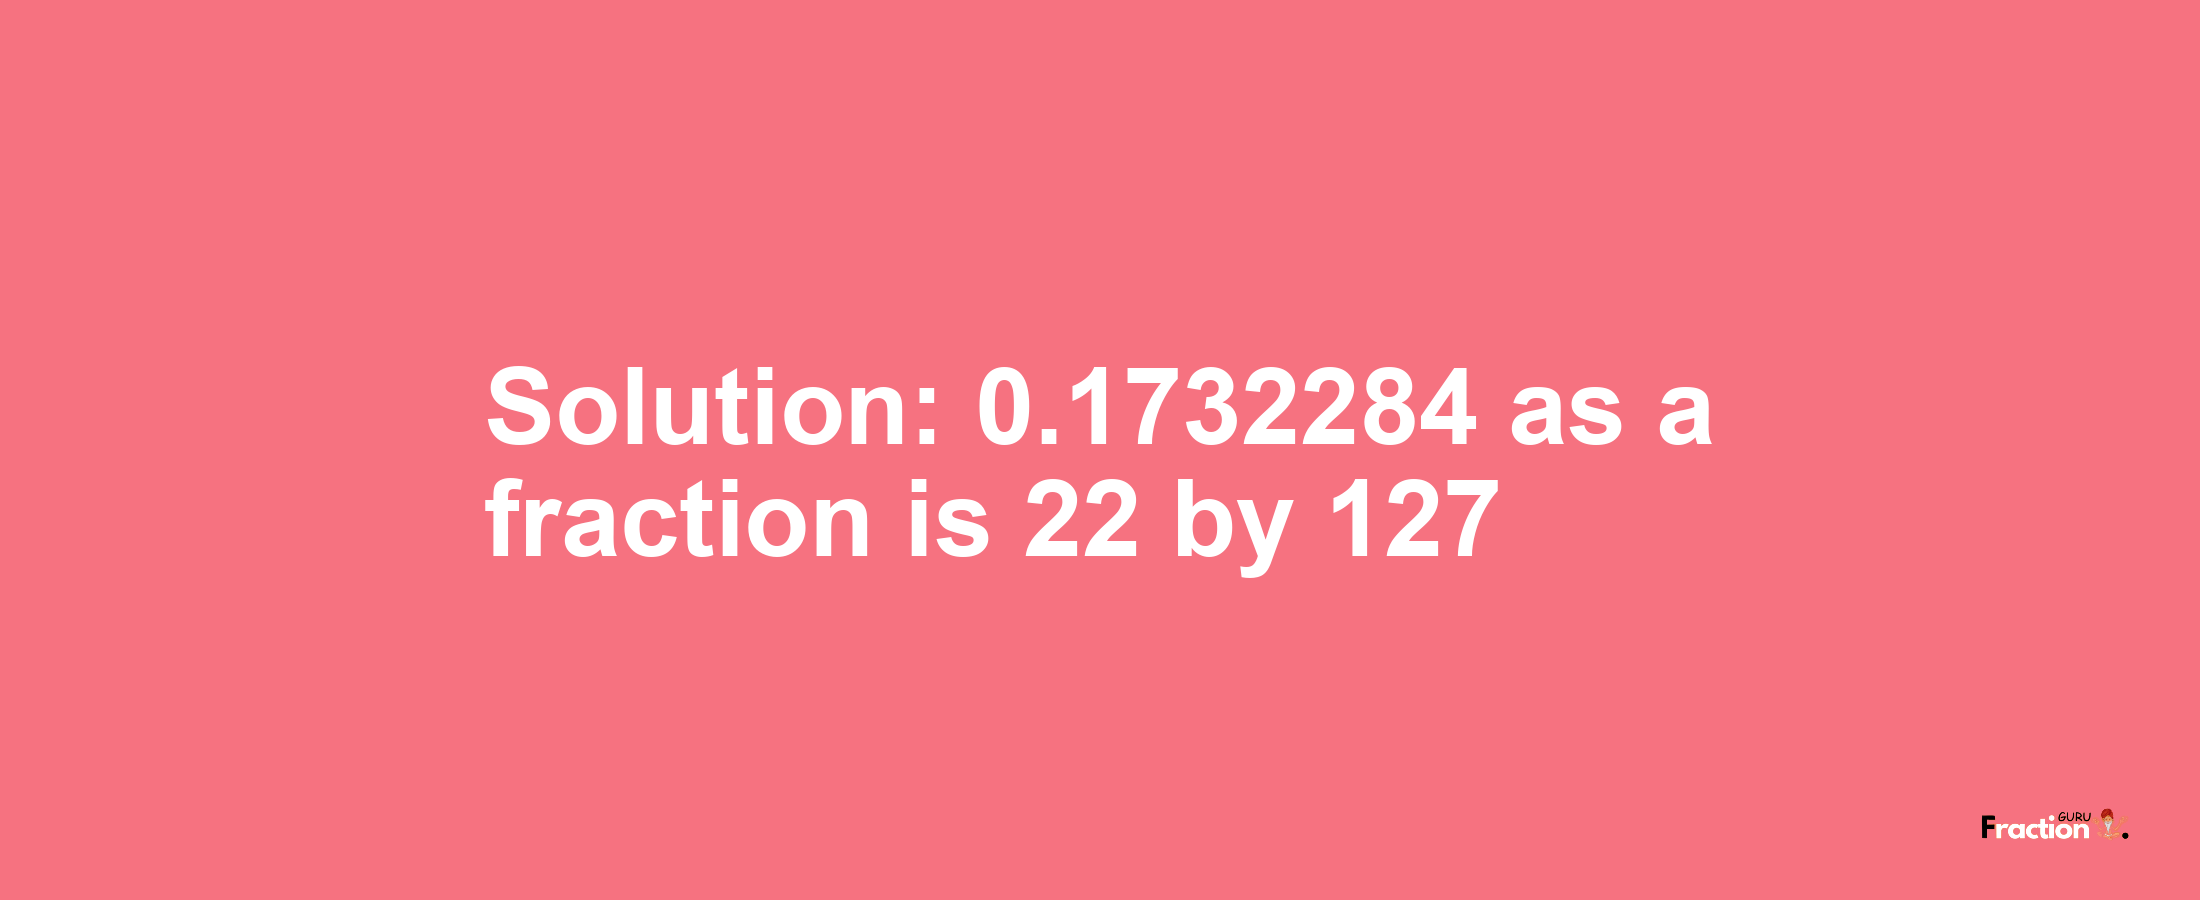 Solution:0.1732284 as a fraction is 22/127